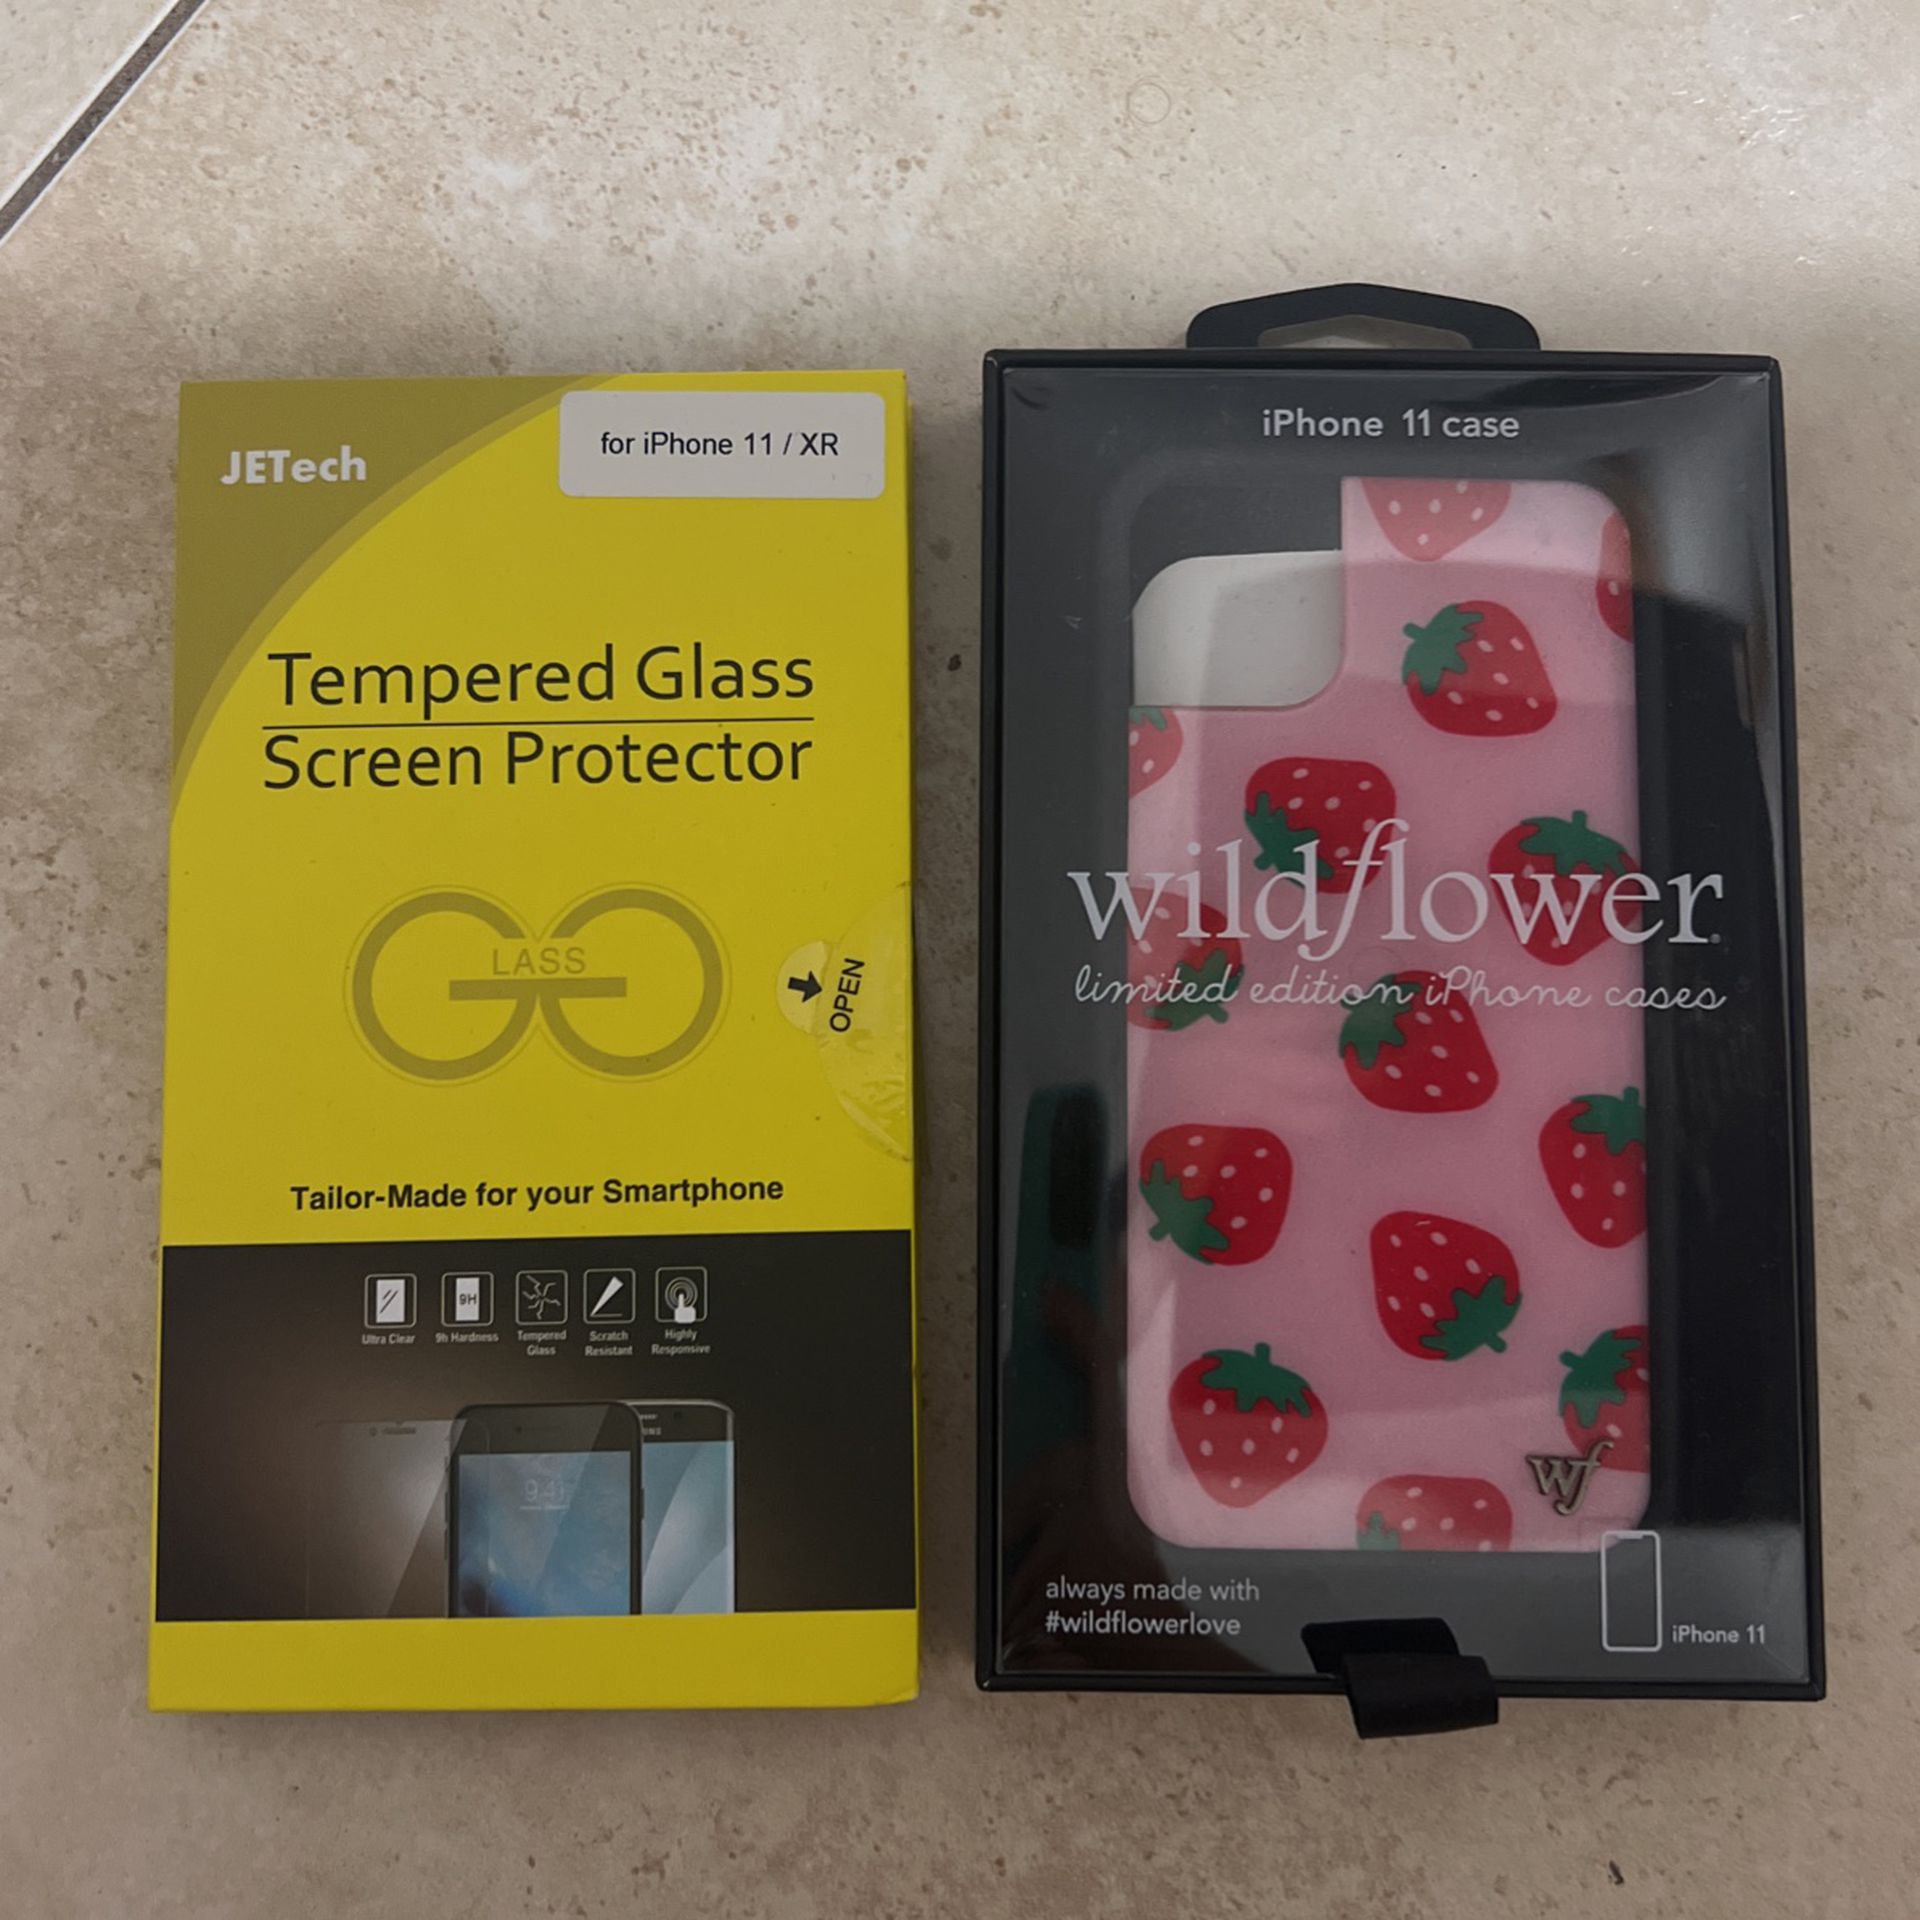 Wildflower case - Iphone 11 with screen protector